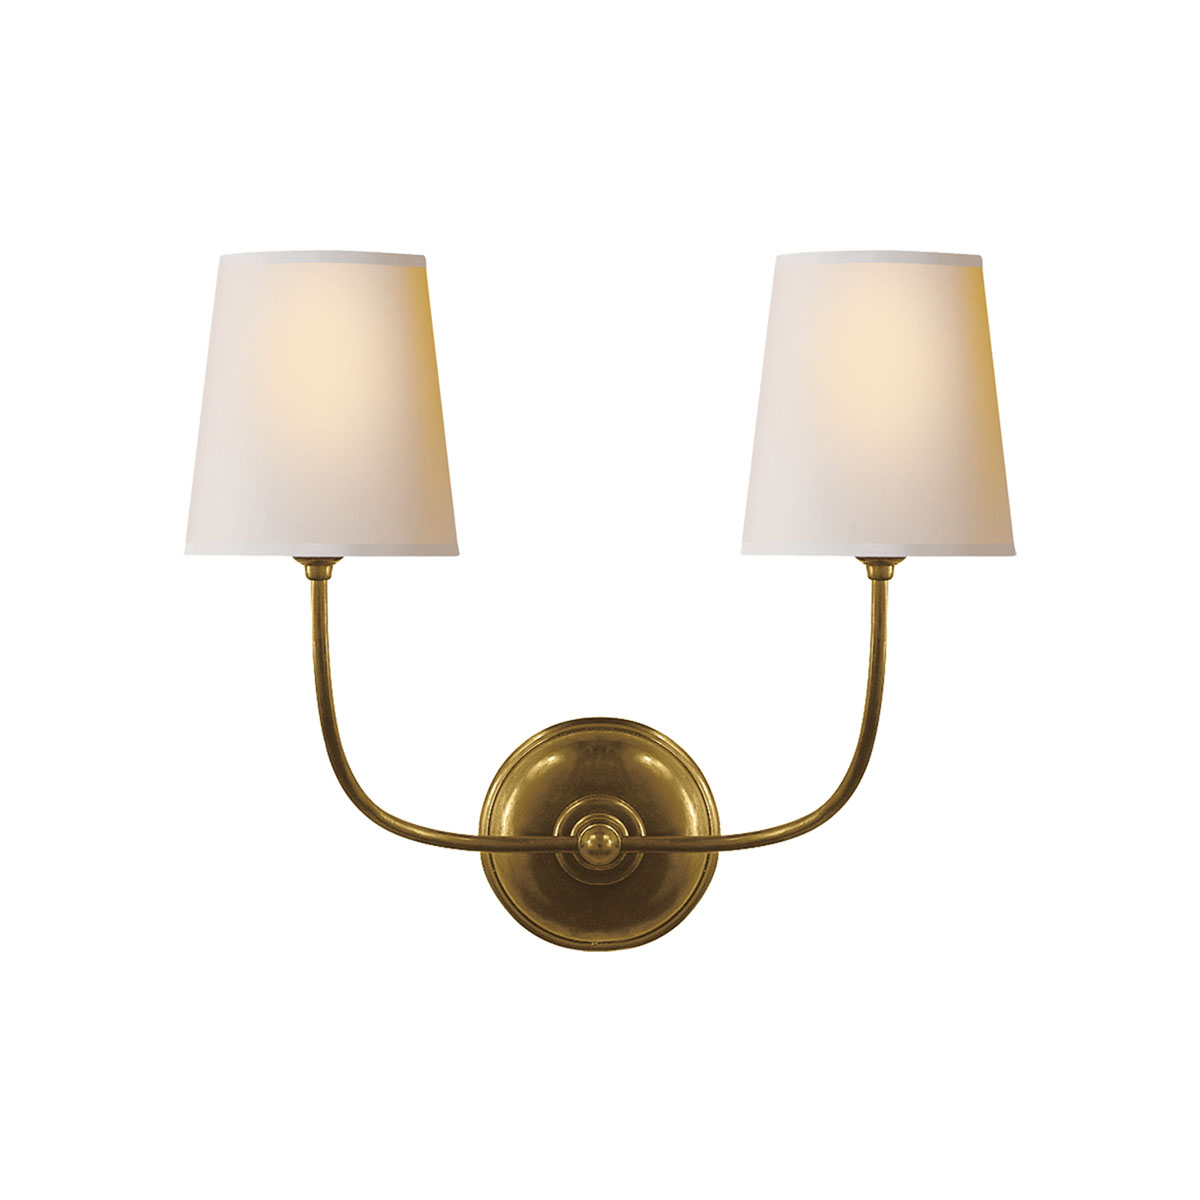 Visual Comfort, Hand Rubbed Antique Brass